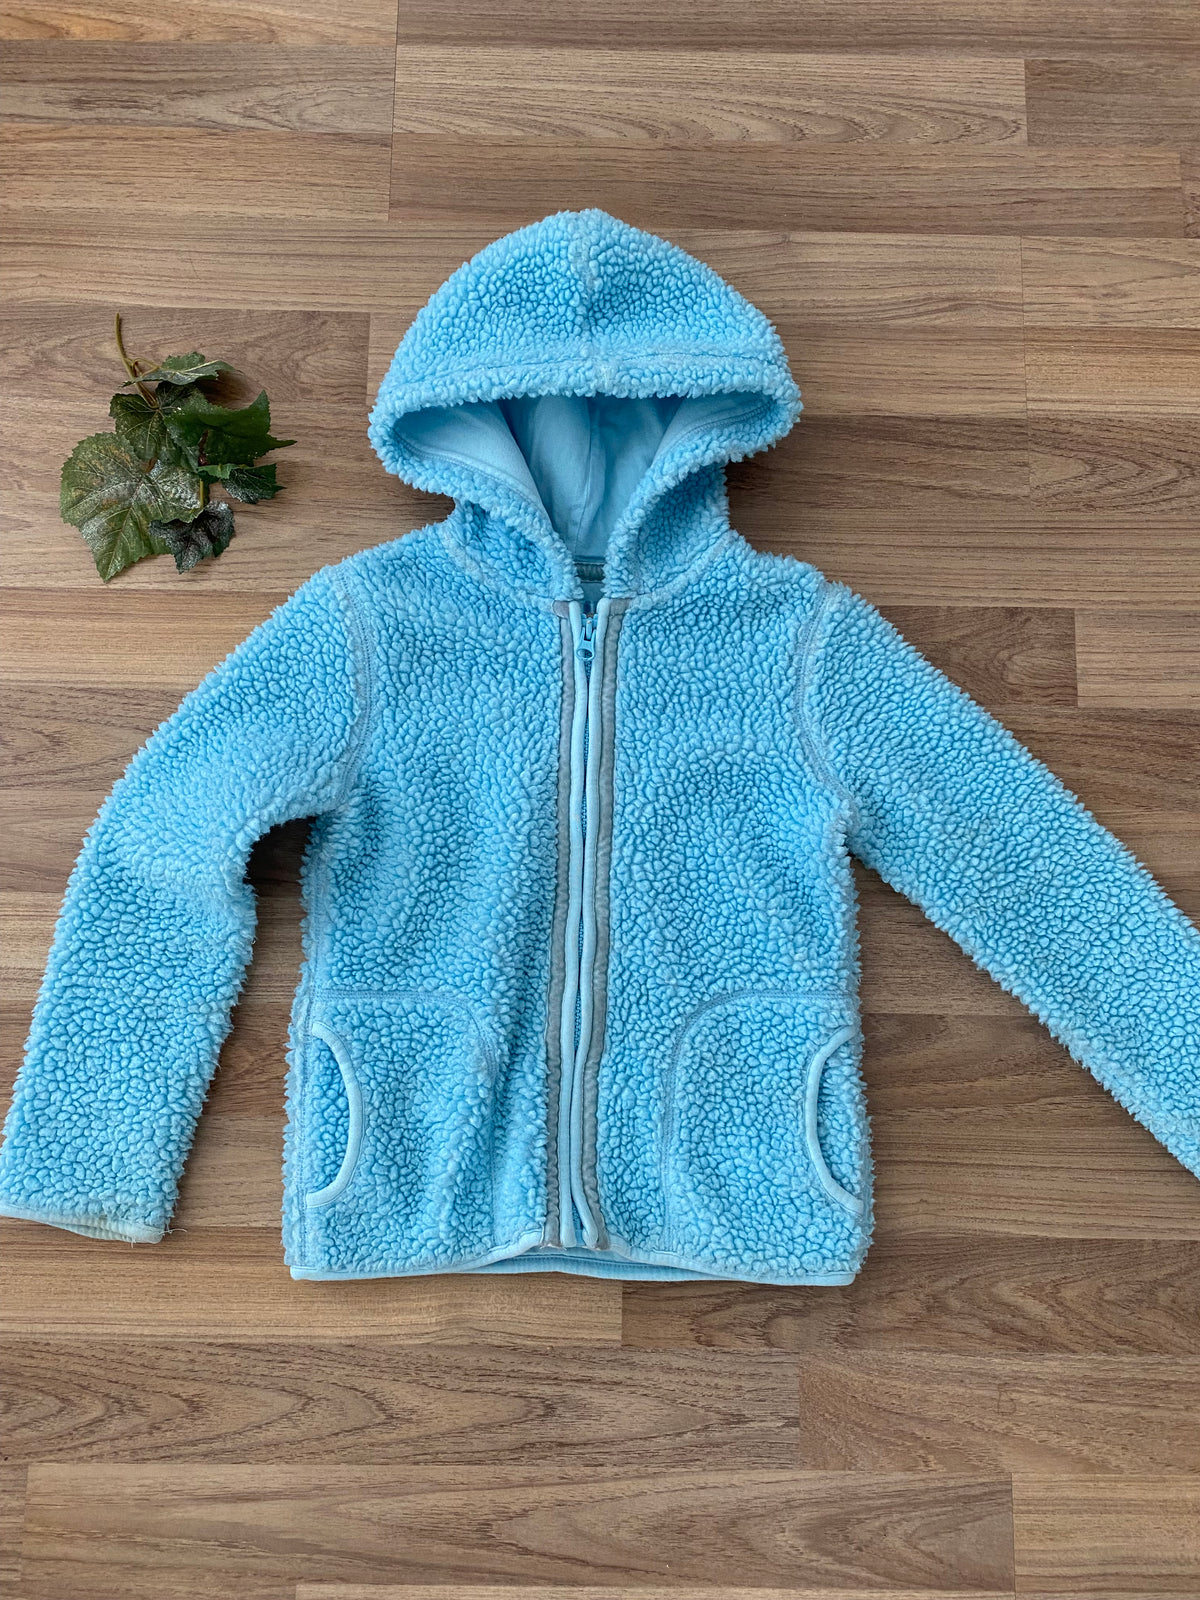 Full Zip Up Hooded Sweater (Girls Size 5-6)